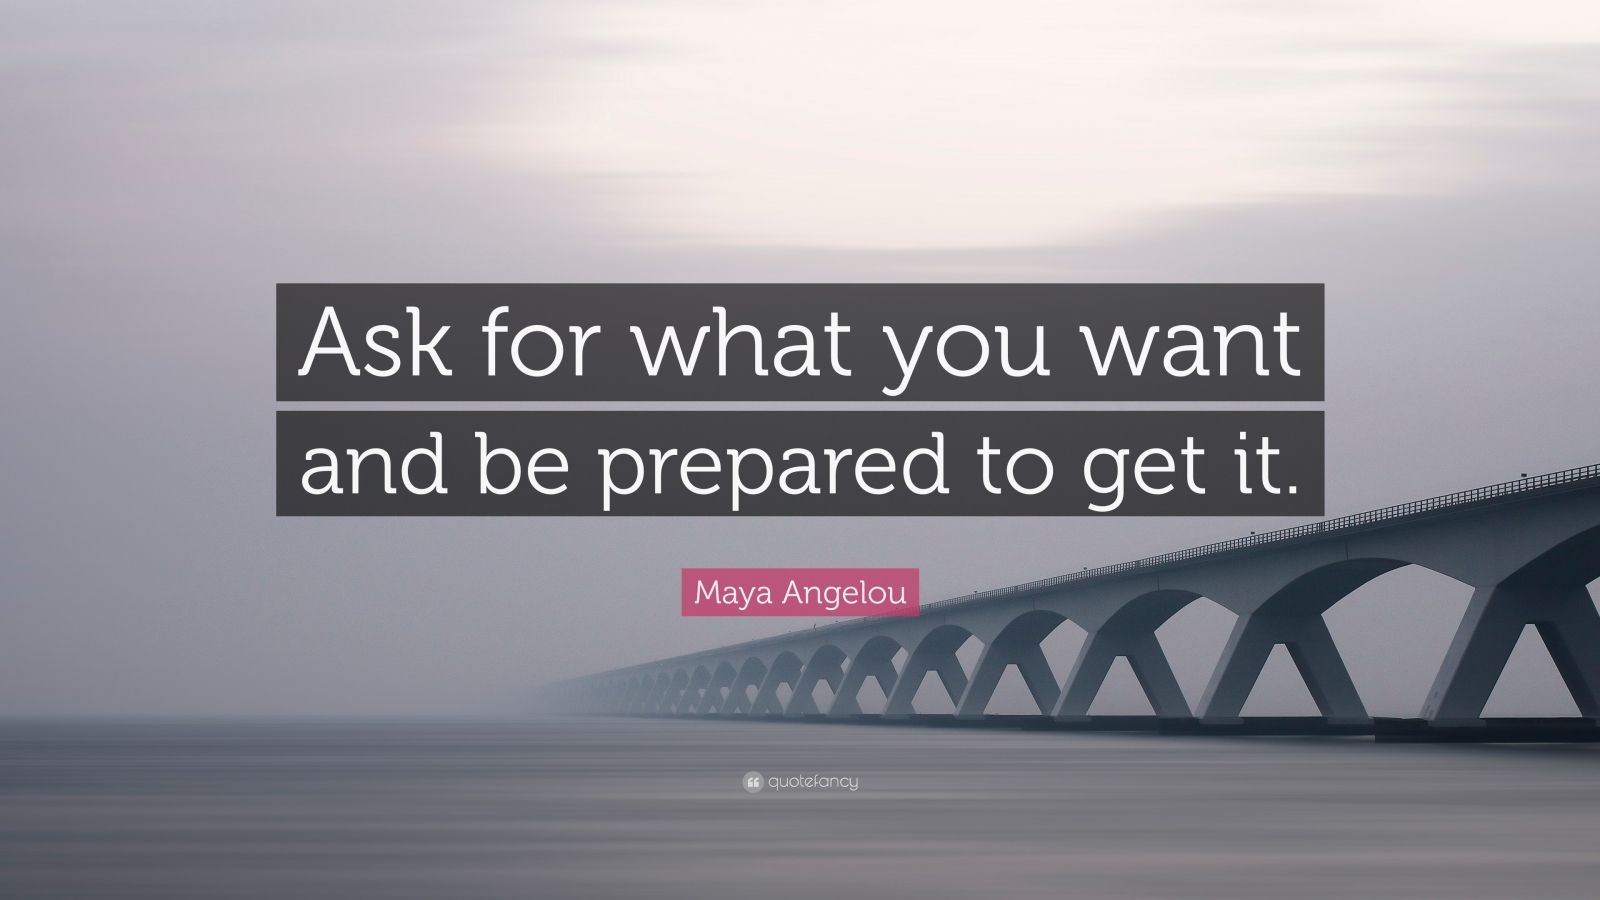 Maya Angelou Quote: “Ask for what you want and be prepared to get it